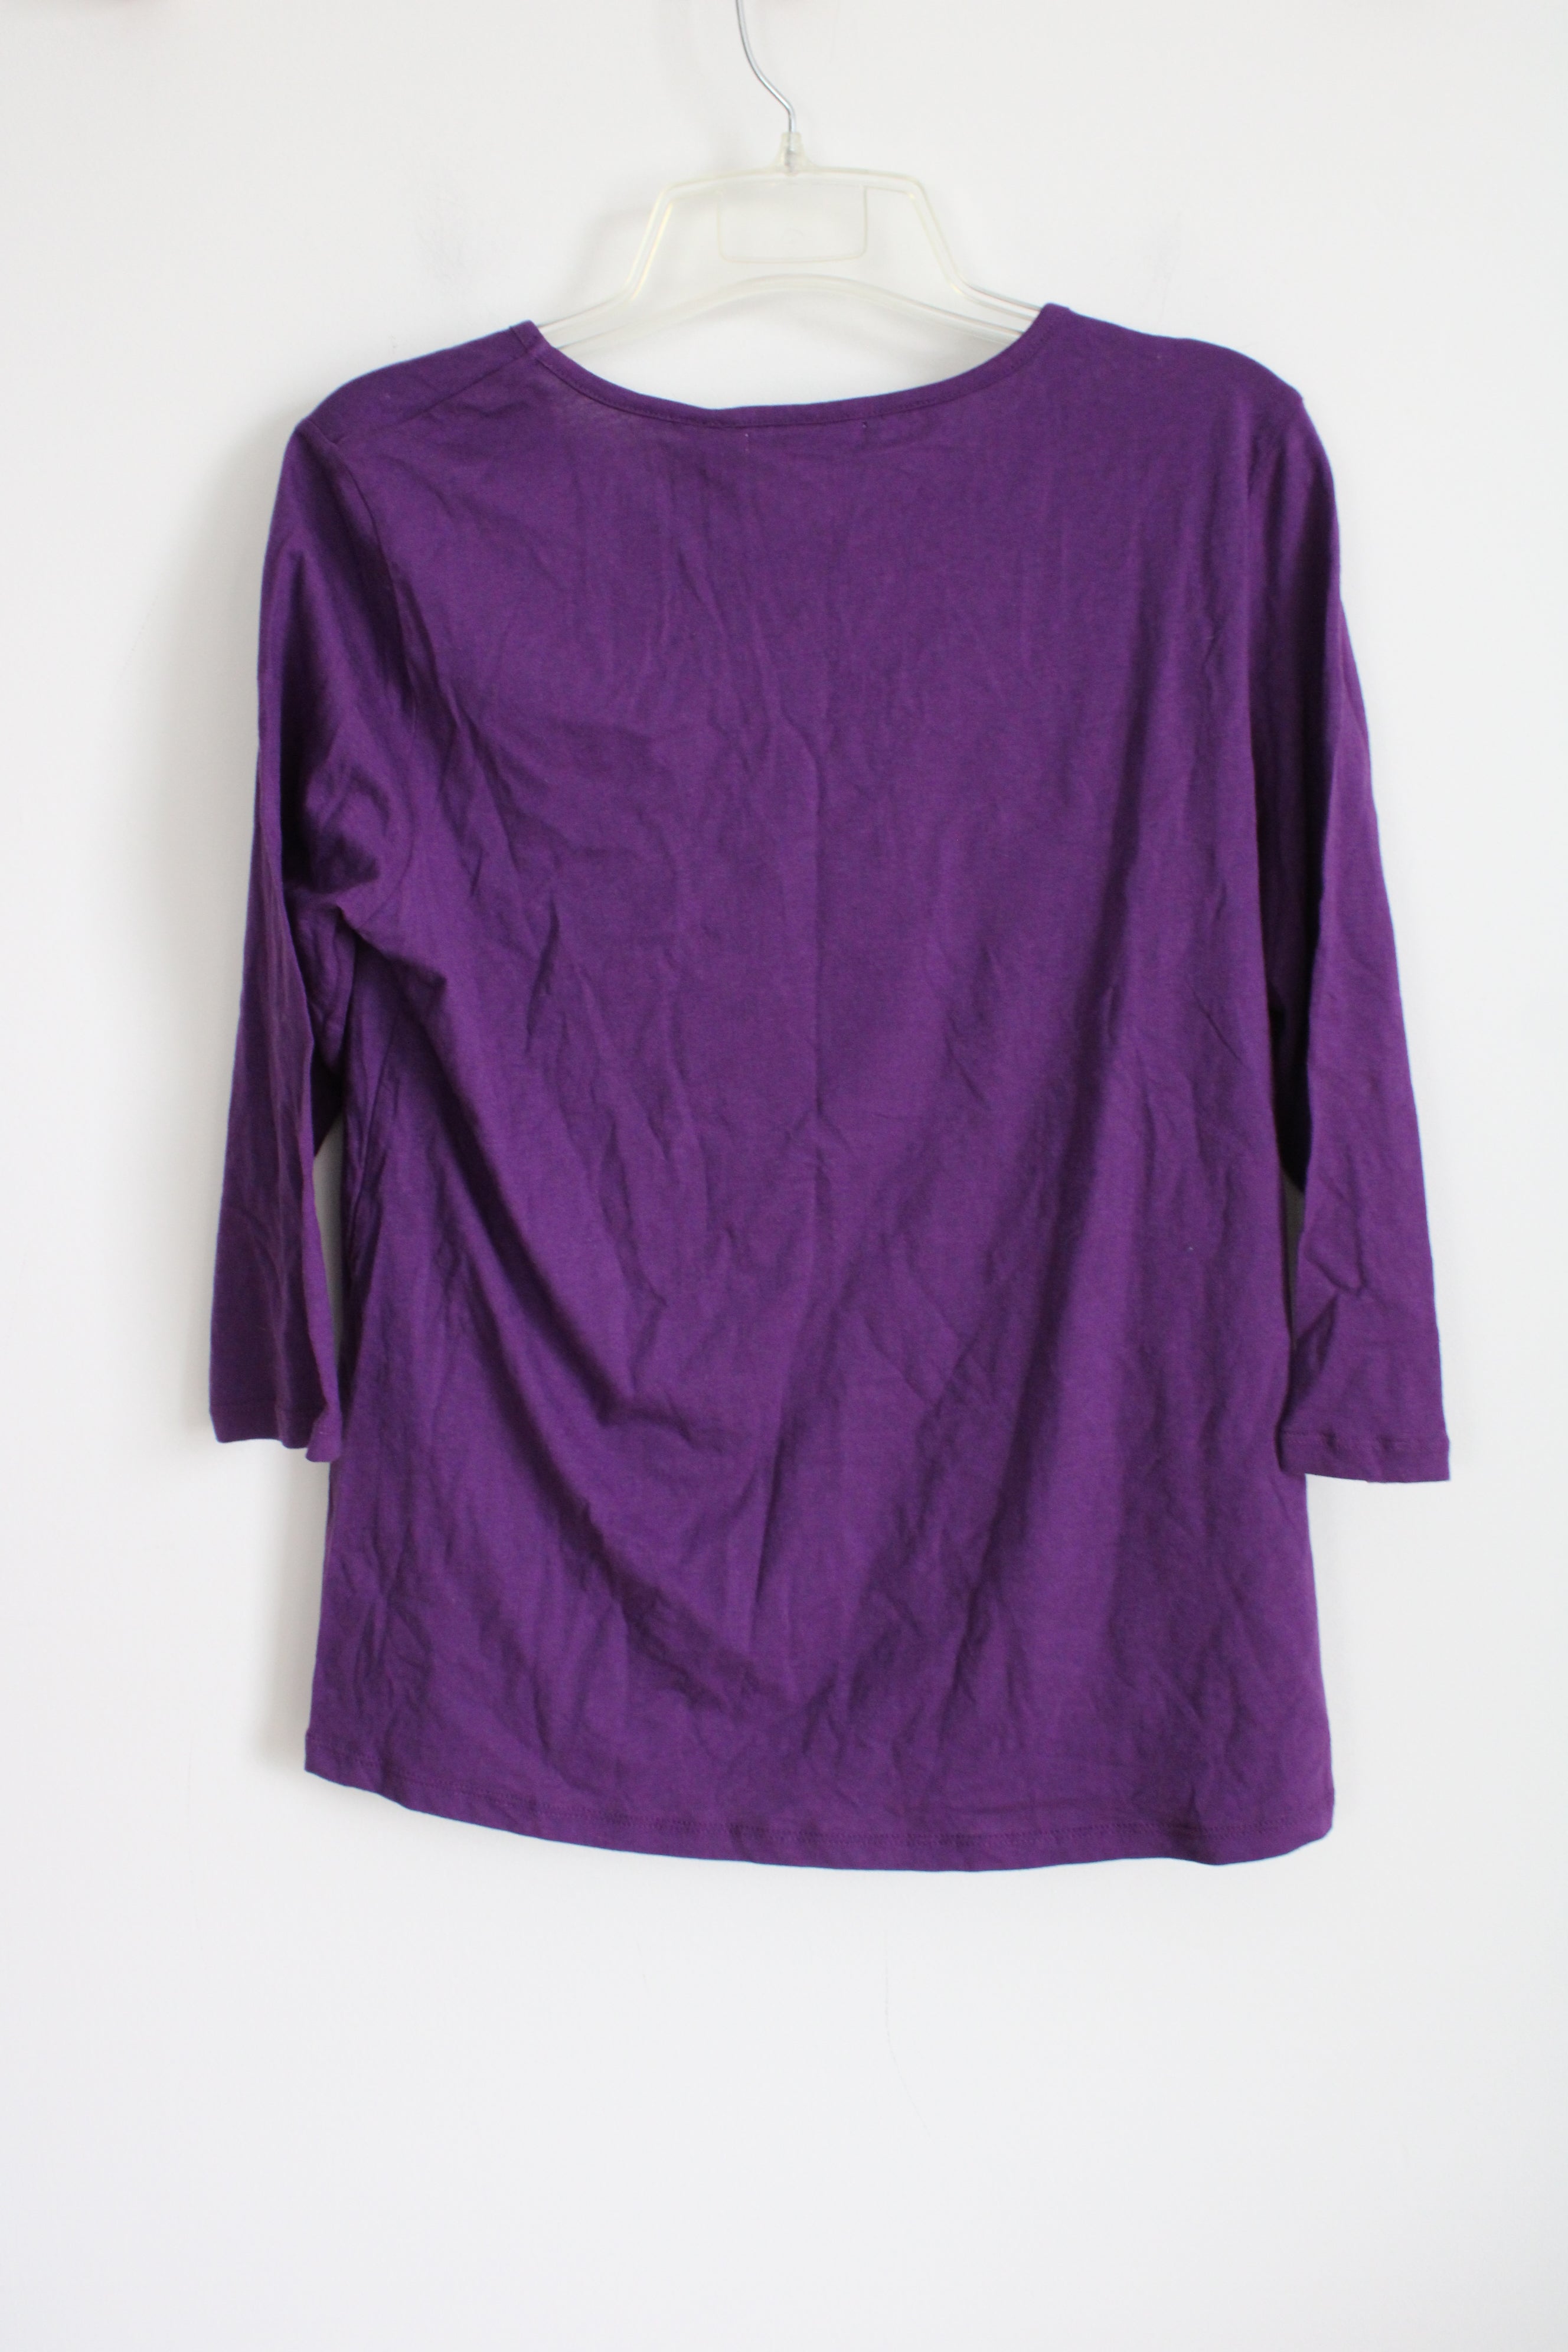 NEW Hasting & Smith Purple Gnome Long sleeved Shirt | L Petite